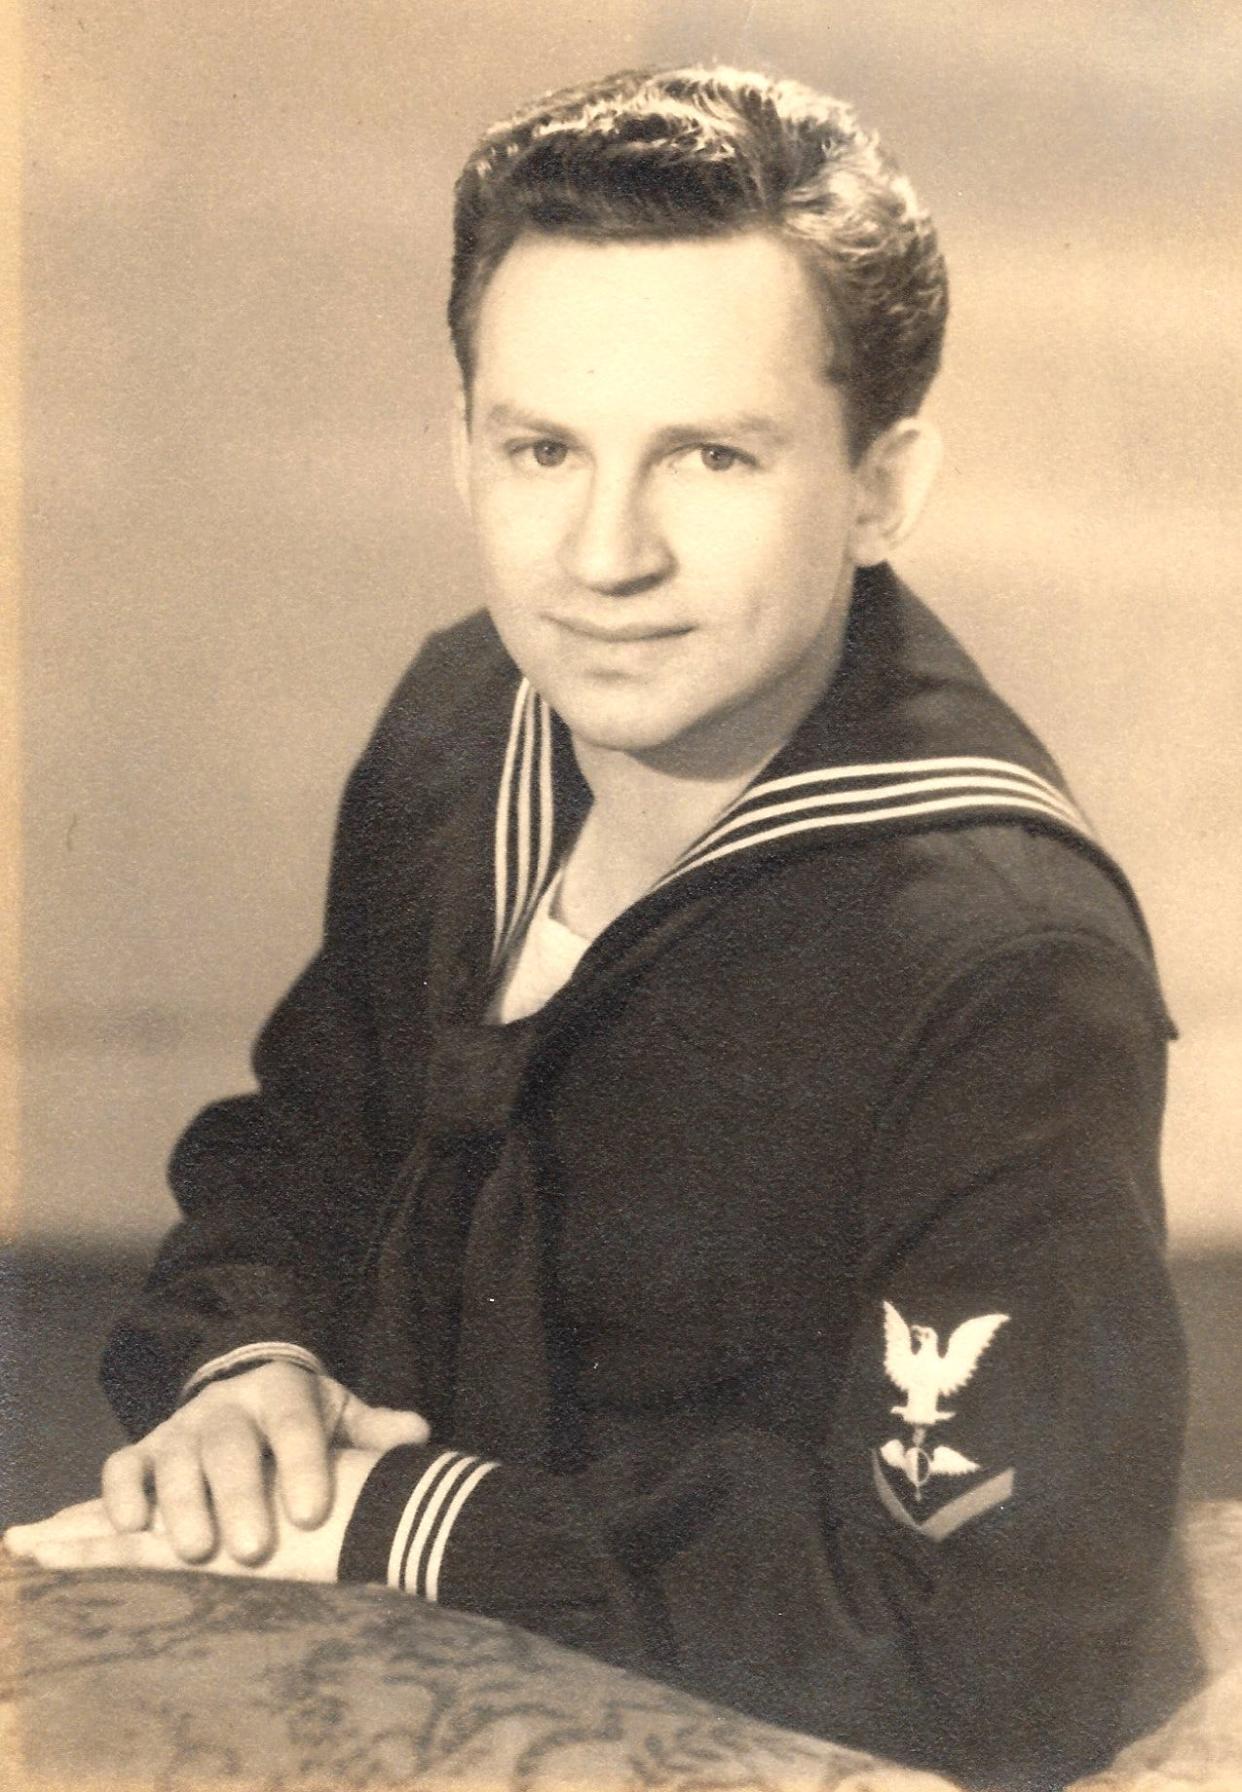 A photo of Si Siman when he was in the U.S. Navy. Siman was the producer of the Ozarks Jubilee, the first regularly broadcast live country music show on network television.